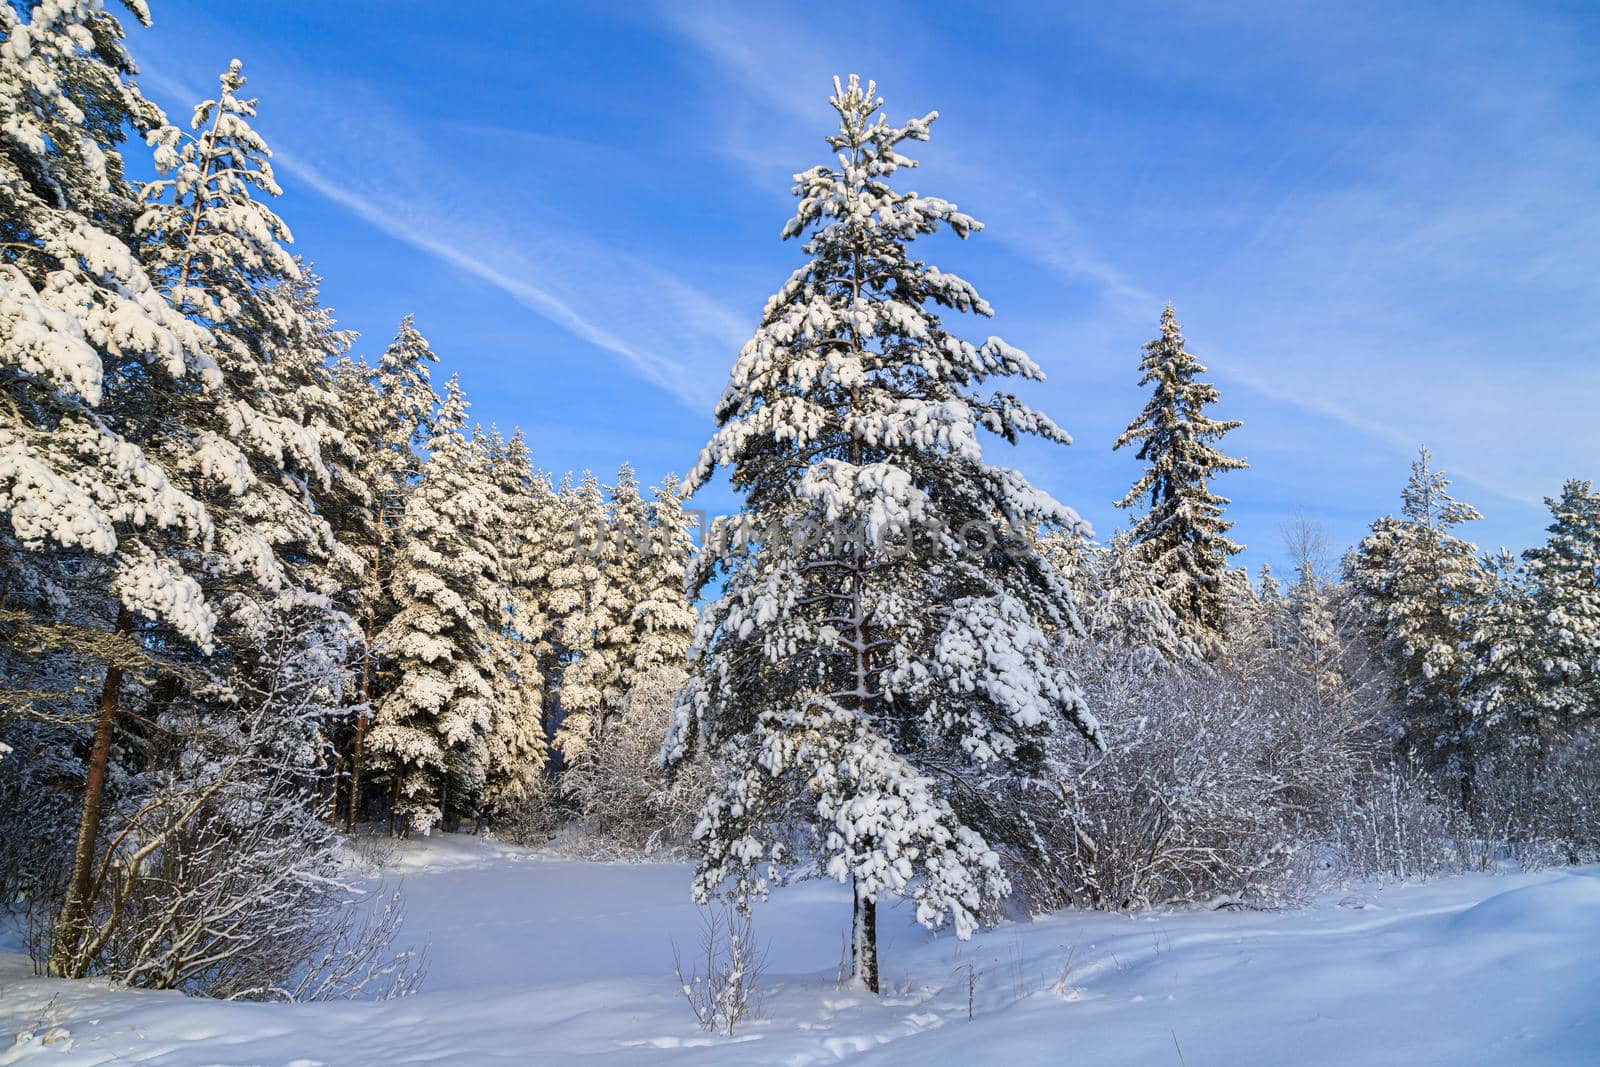 Snowy winter landscape in the forest . Snowy forest. An article about winter. Winter painting .